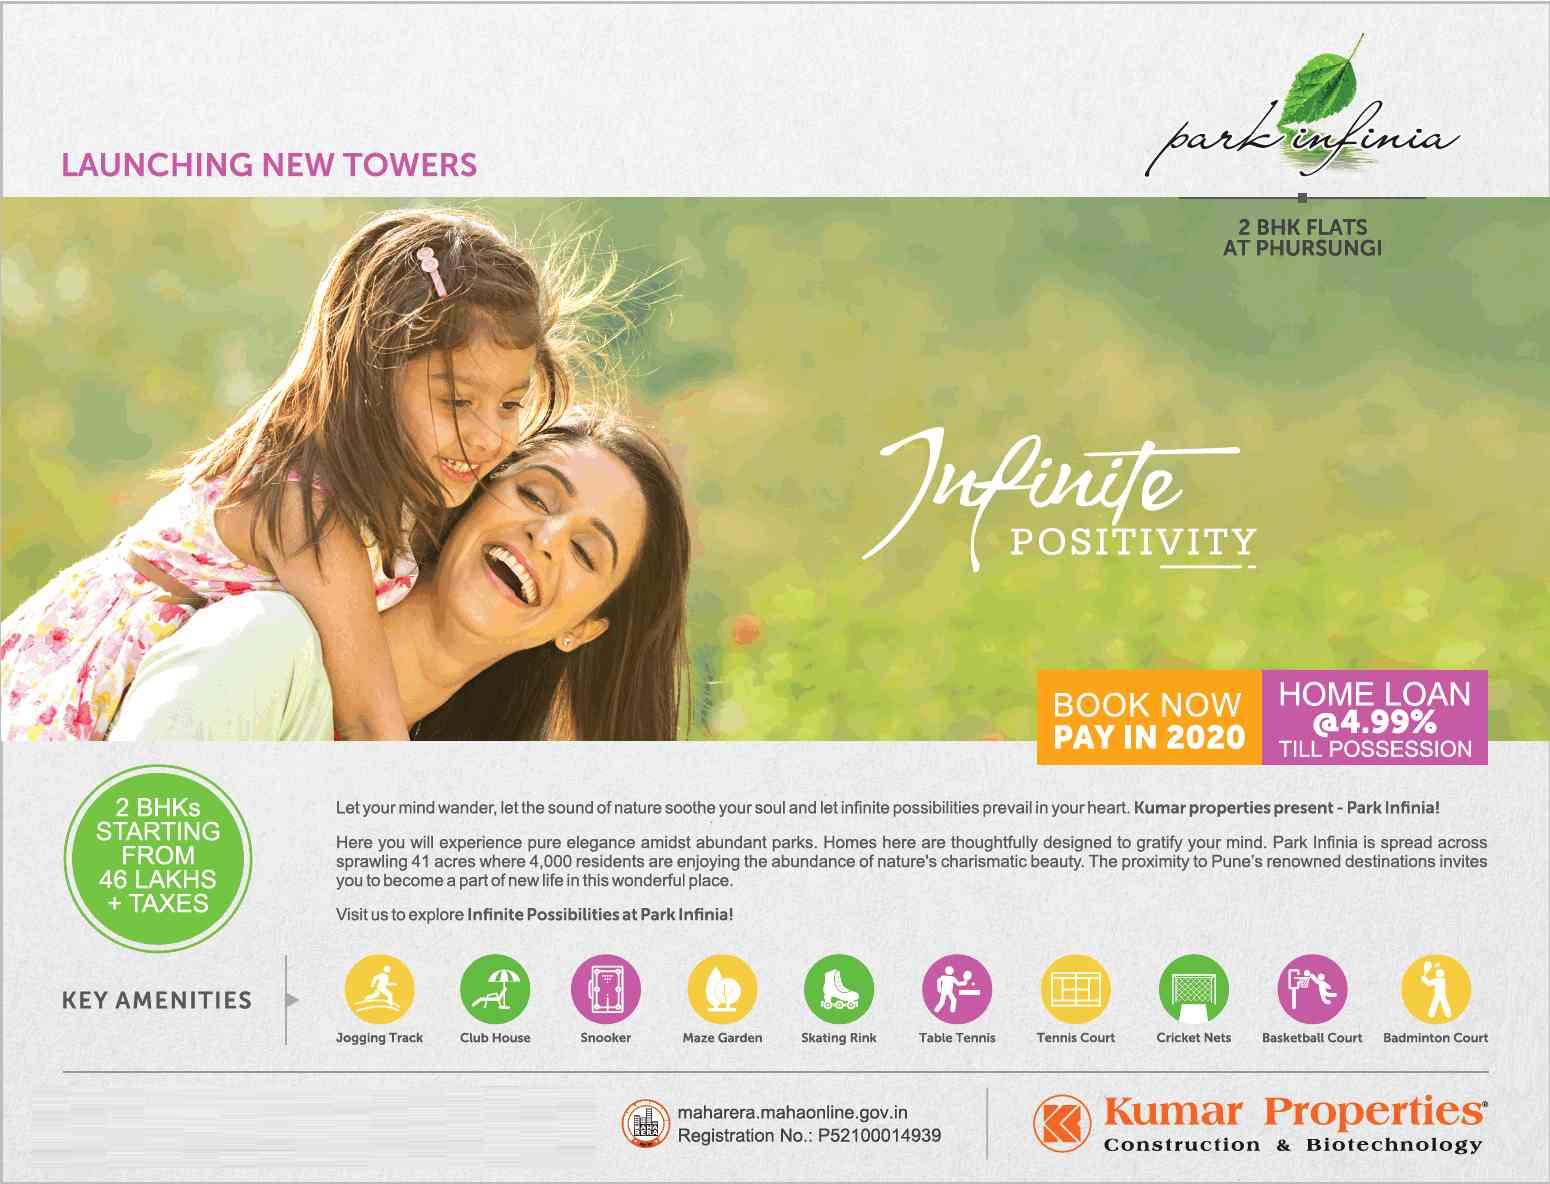 Book now & pay in 2020 with home loan @ 4.99% till possession at Kumar Park Infinia in Pune Update